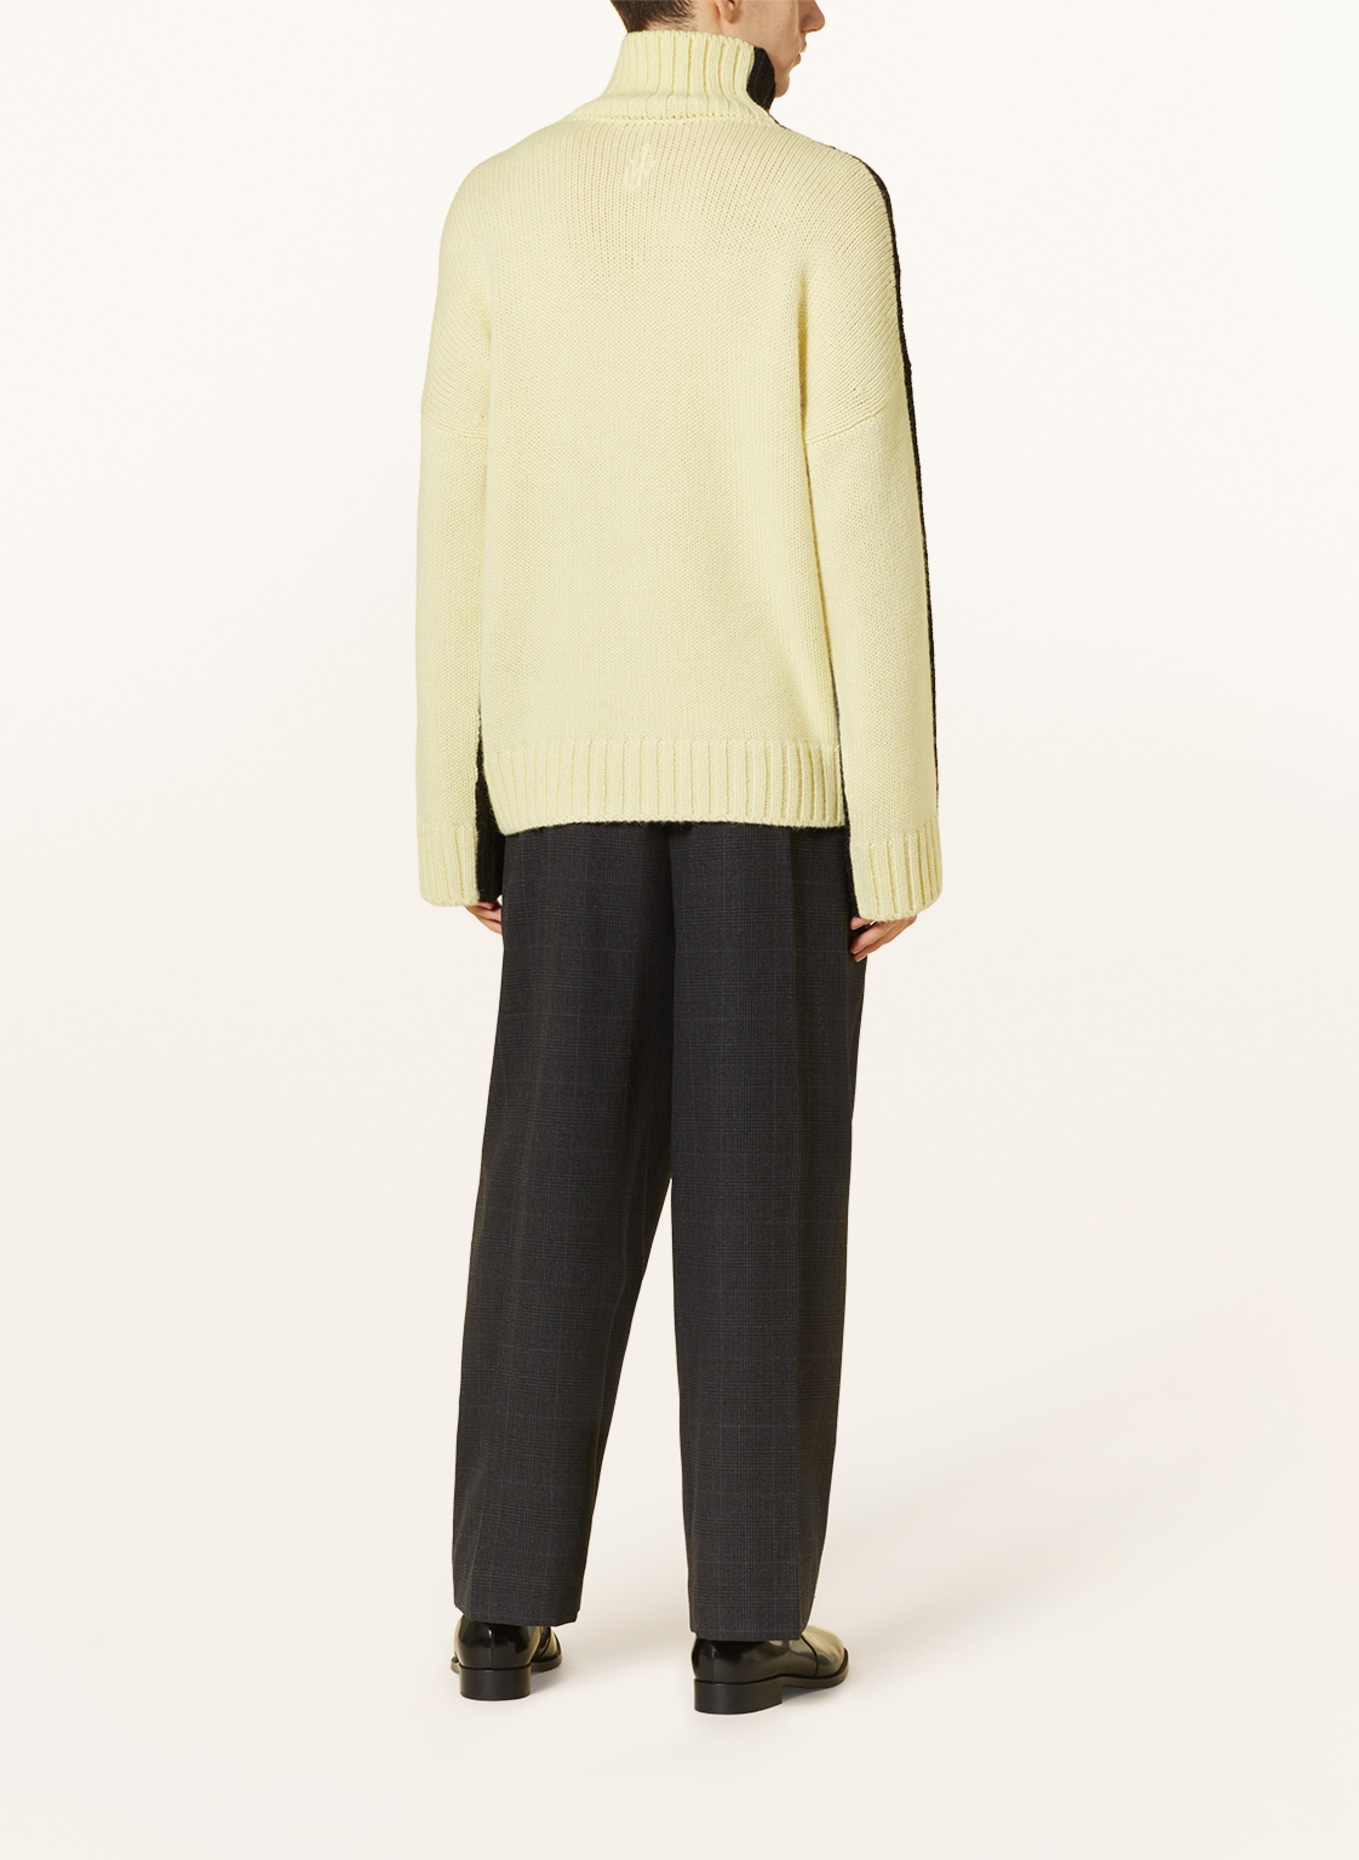 JW ANDERSON Sweater with alpaca, Color: BLACK/ LIGHT YELLOW (Image 3)